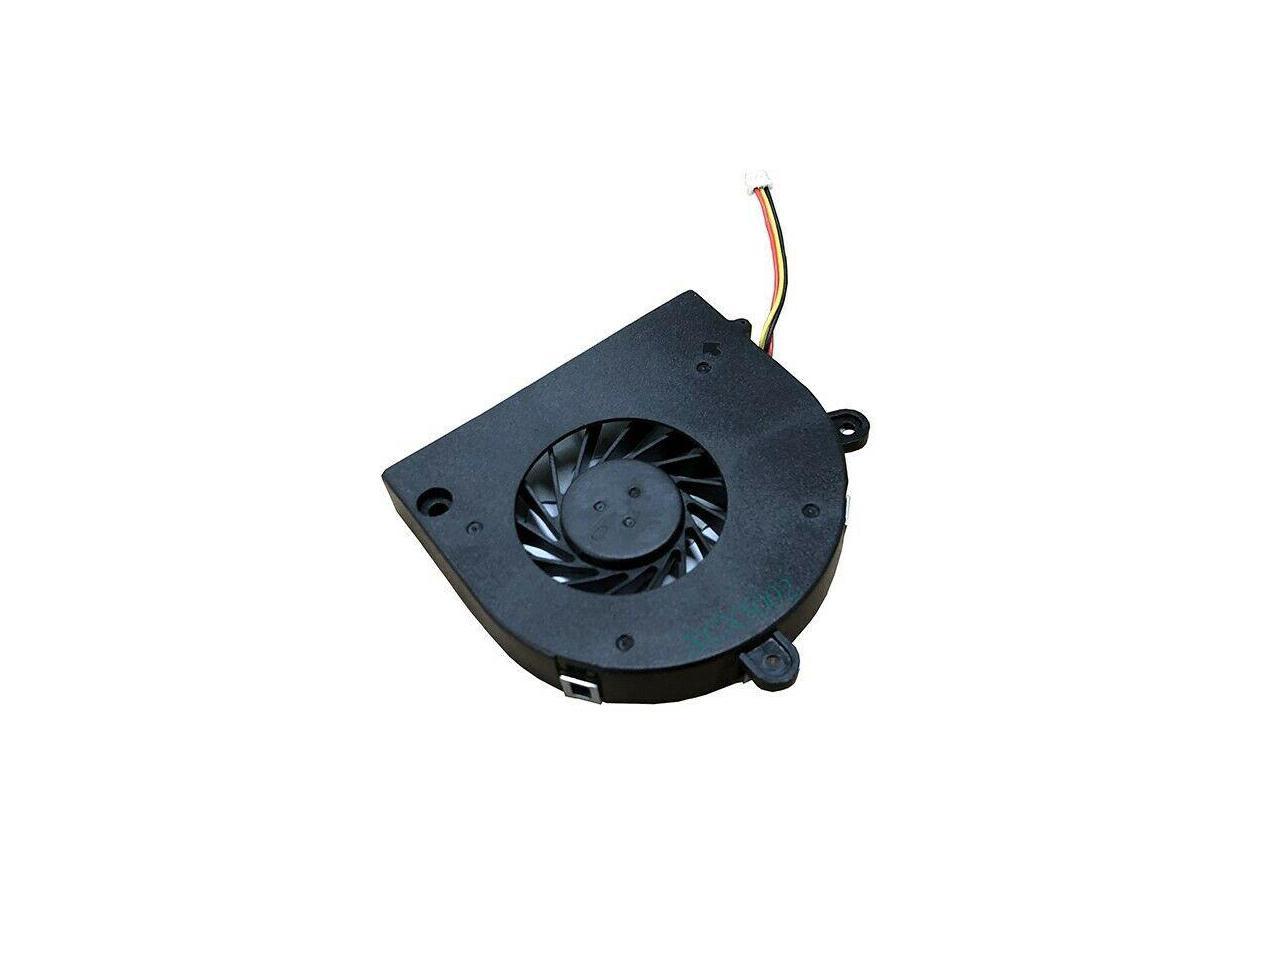 For Acer Aspire 5251-1513 5251-1245 5251-1940 5251-1202G32MNCK​ Cpu Cooling Fan 